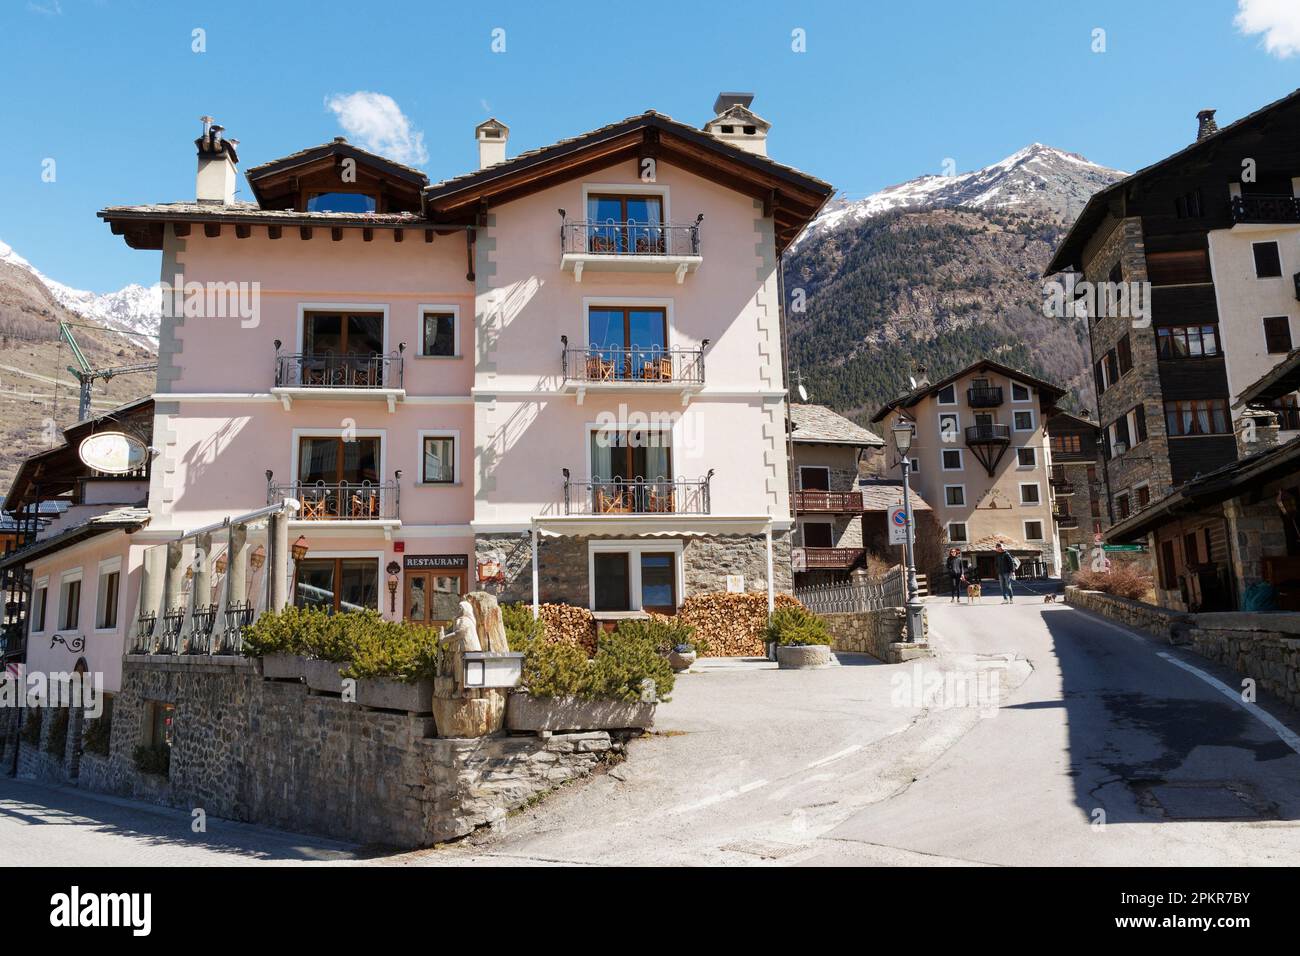 Quaint roadside properties and a mountain in Cogne, capital of the Gran Paradiso National Park in Aosta Valley region, Italy Stock Photo